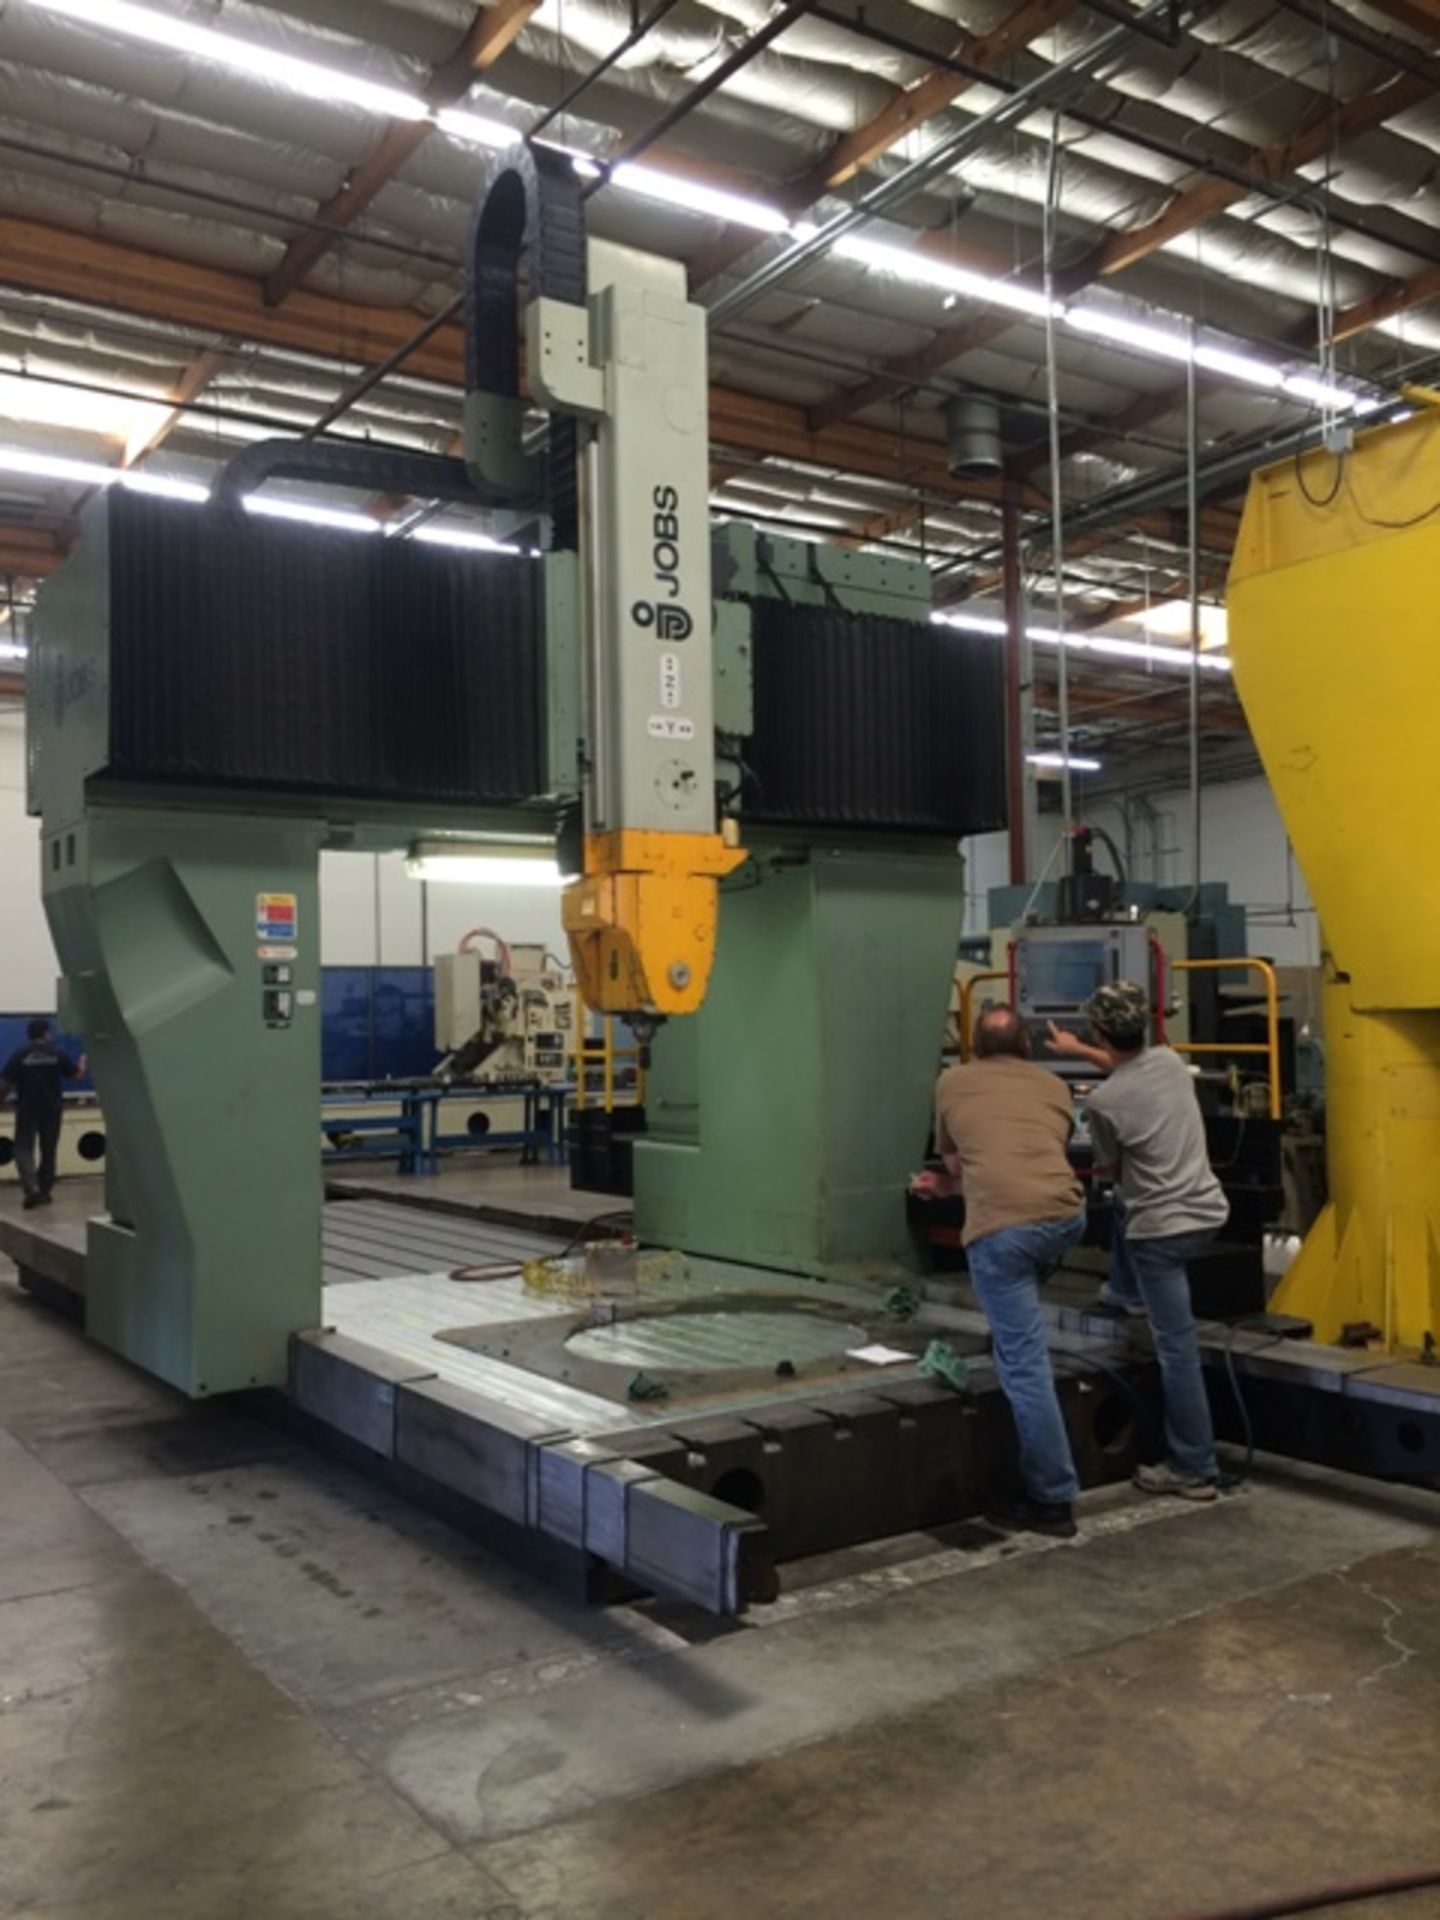 Jobs Jomach 23 5-Axis CNC Gantry-Style Machining Center, Fidia M-2 Control, 1992 Located in Brea, CA